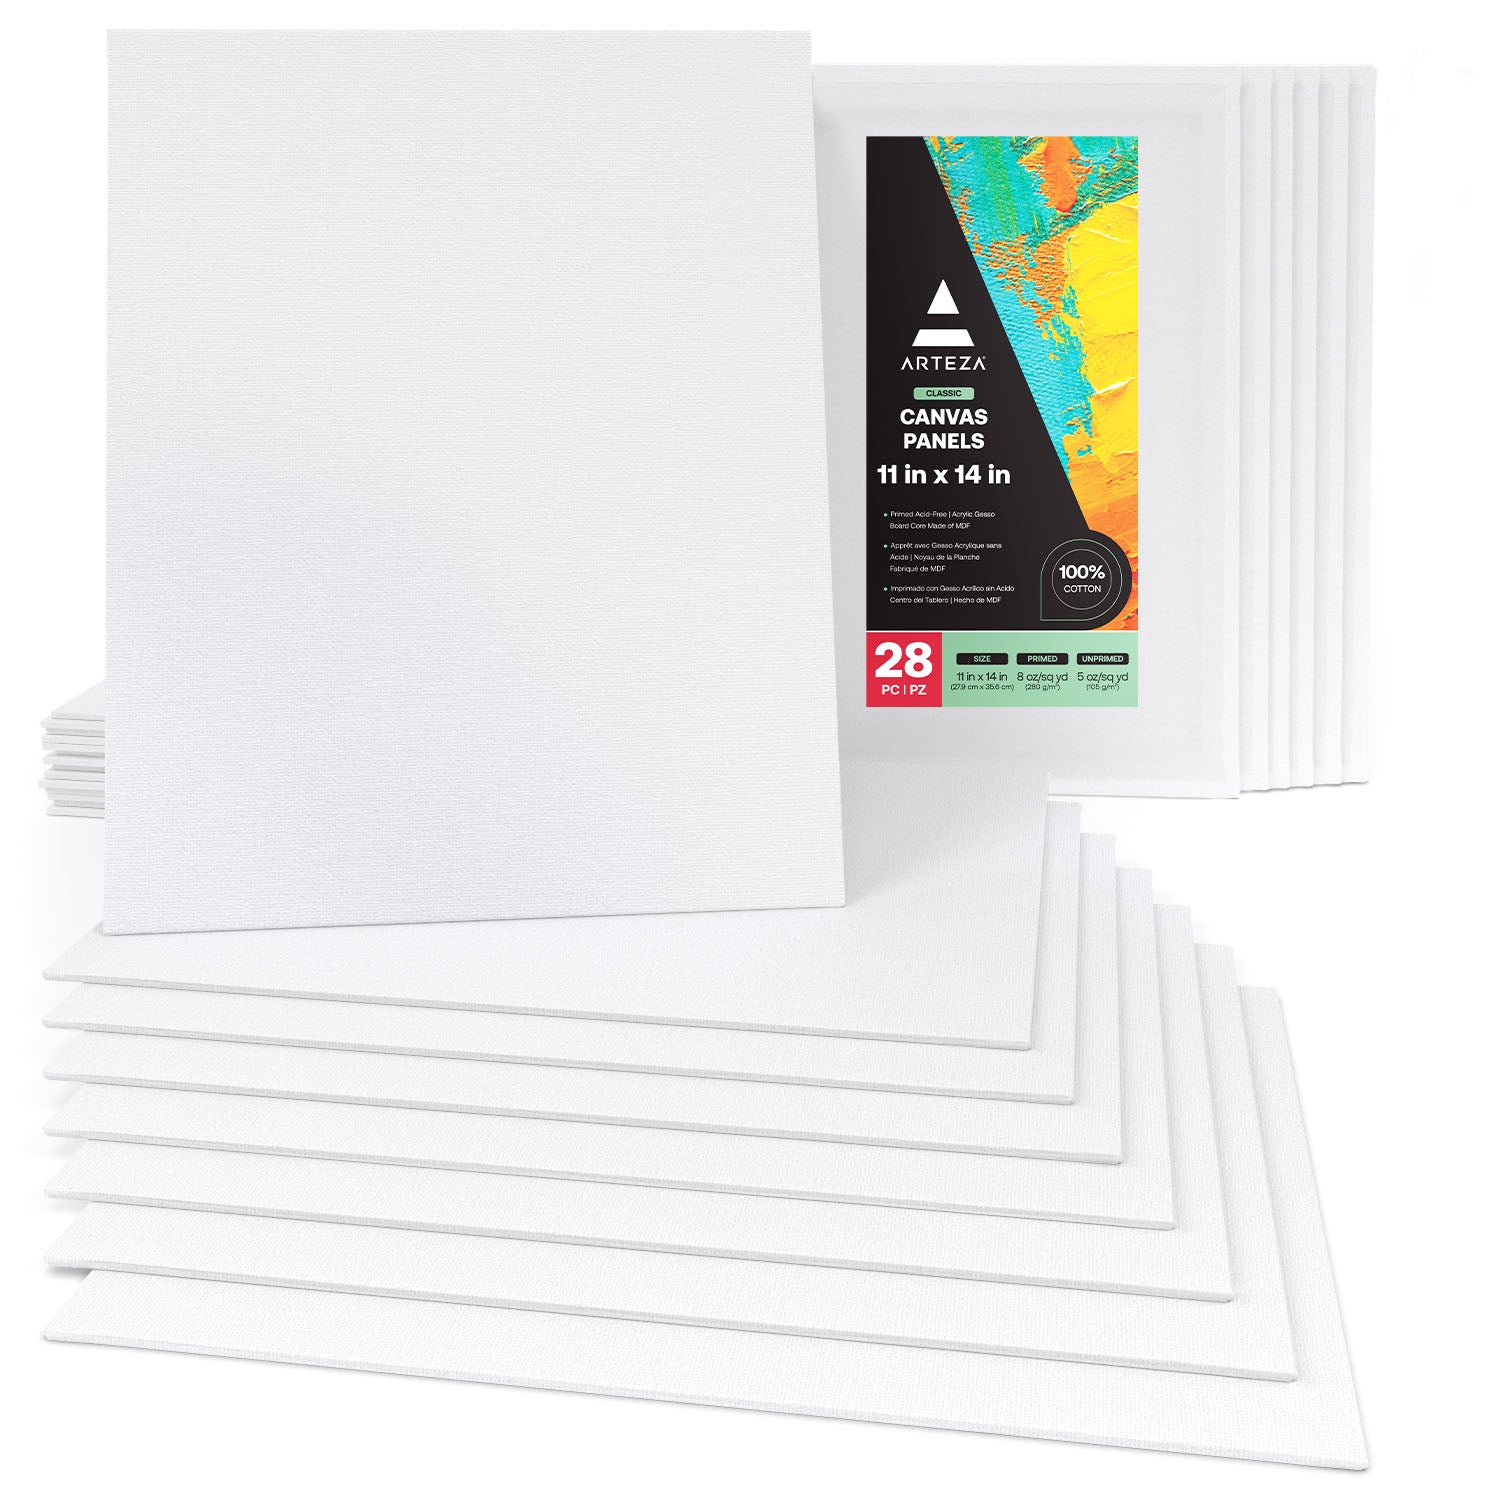 Arteza Canvas Panels, Classic, Black, 11 inchx14 inch, Blank Canvas Boards for Painting - 14 Pack